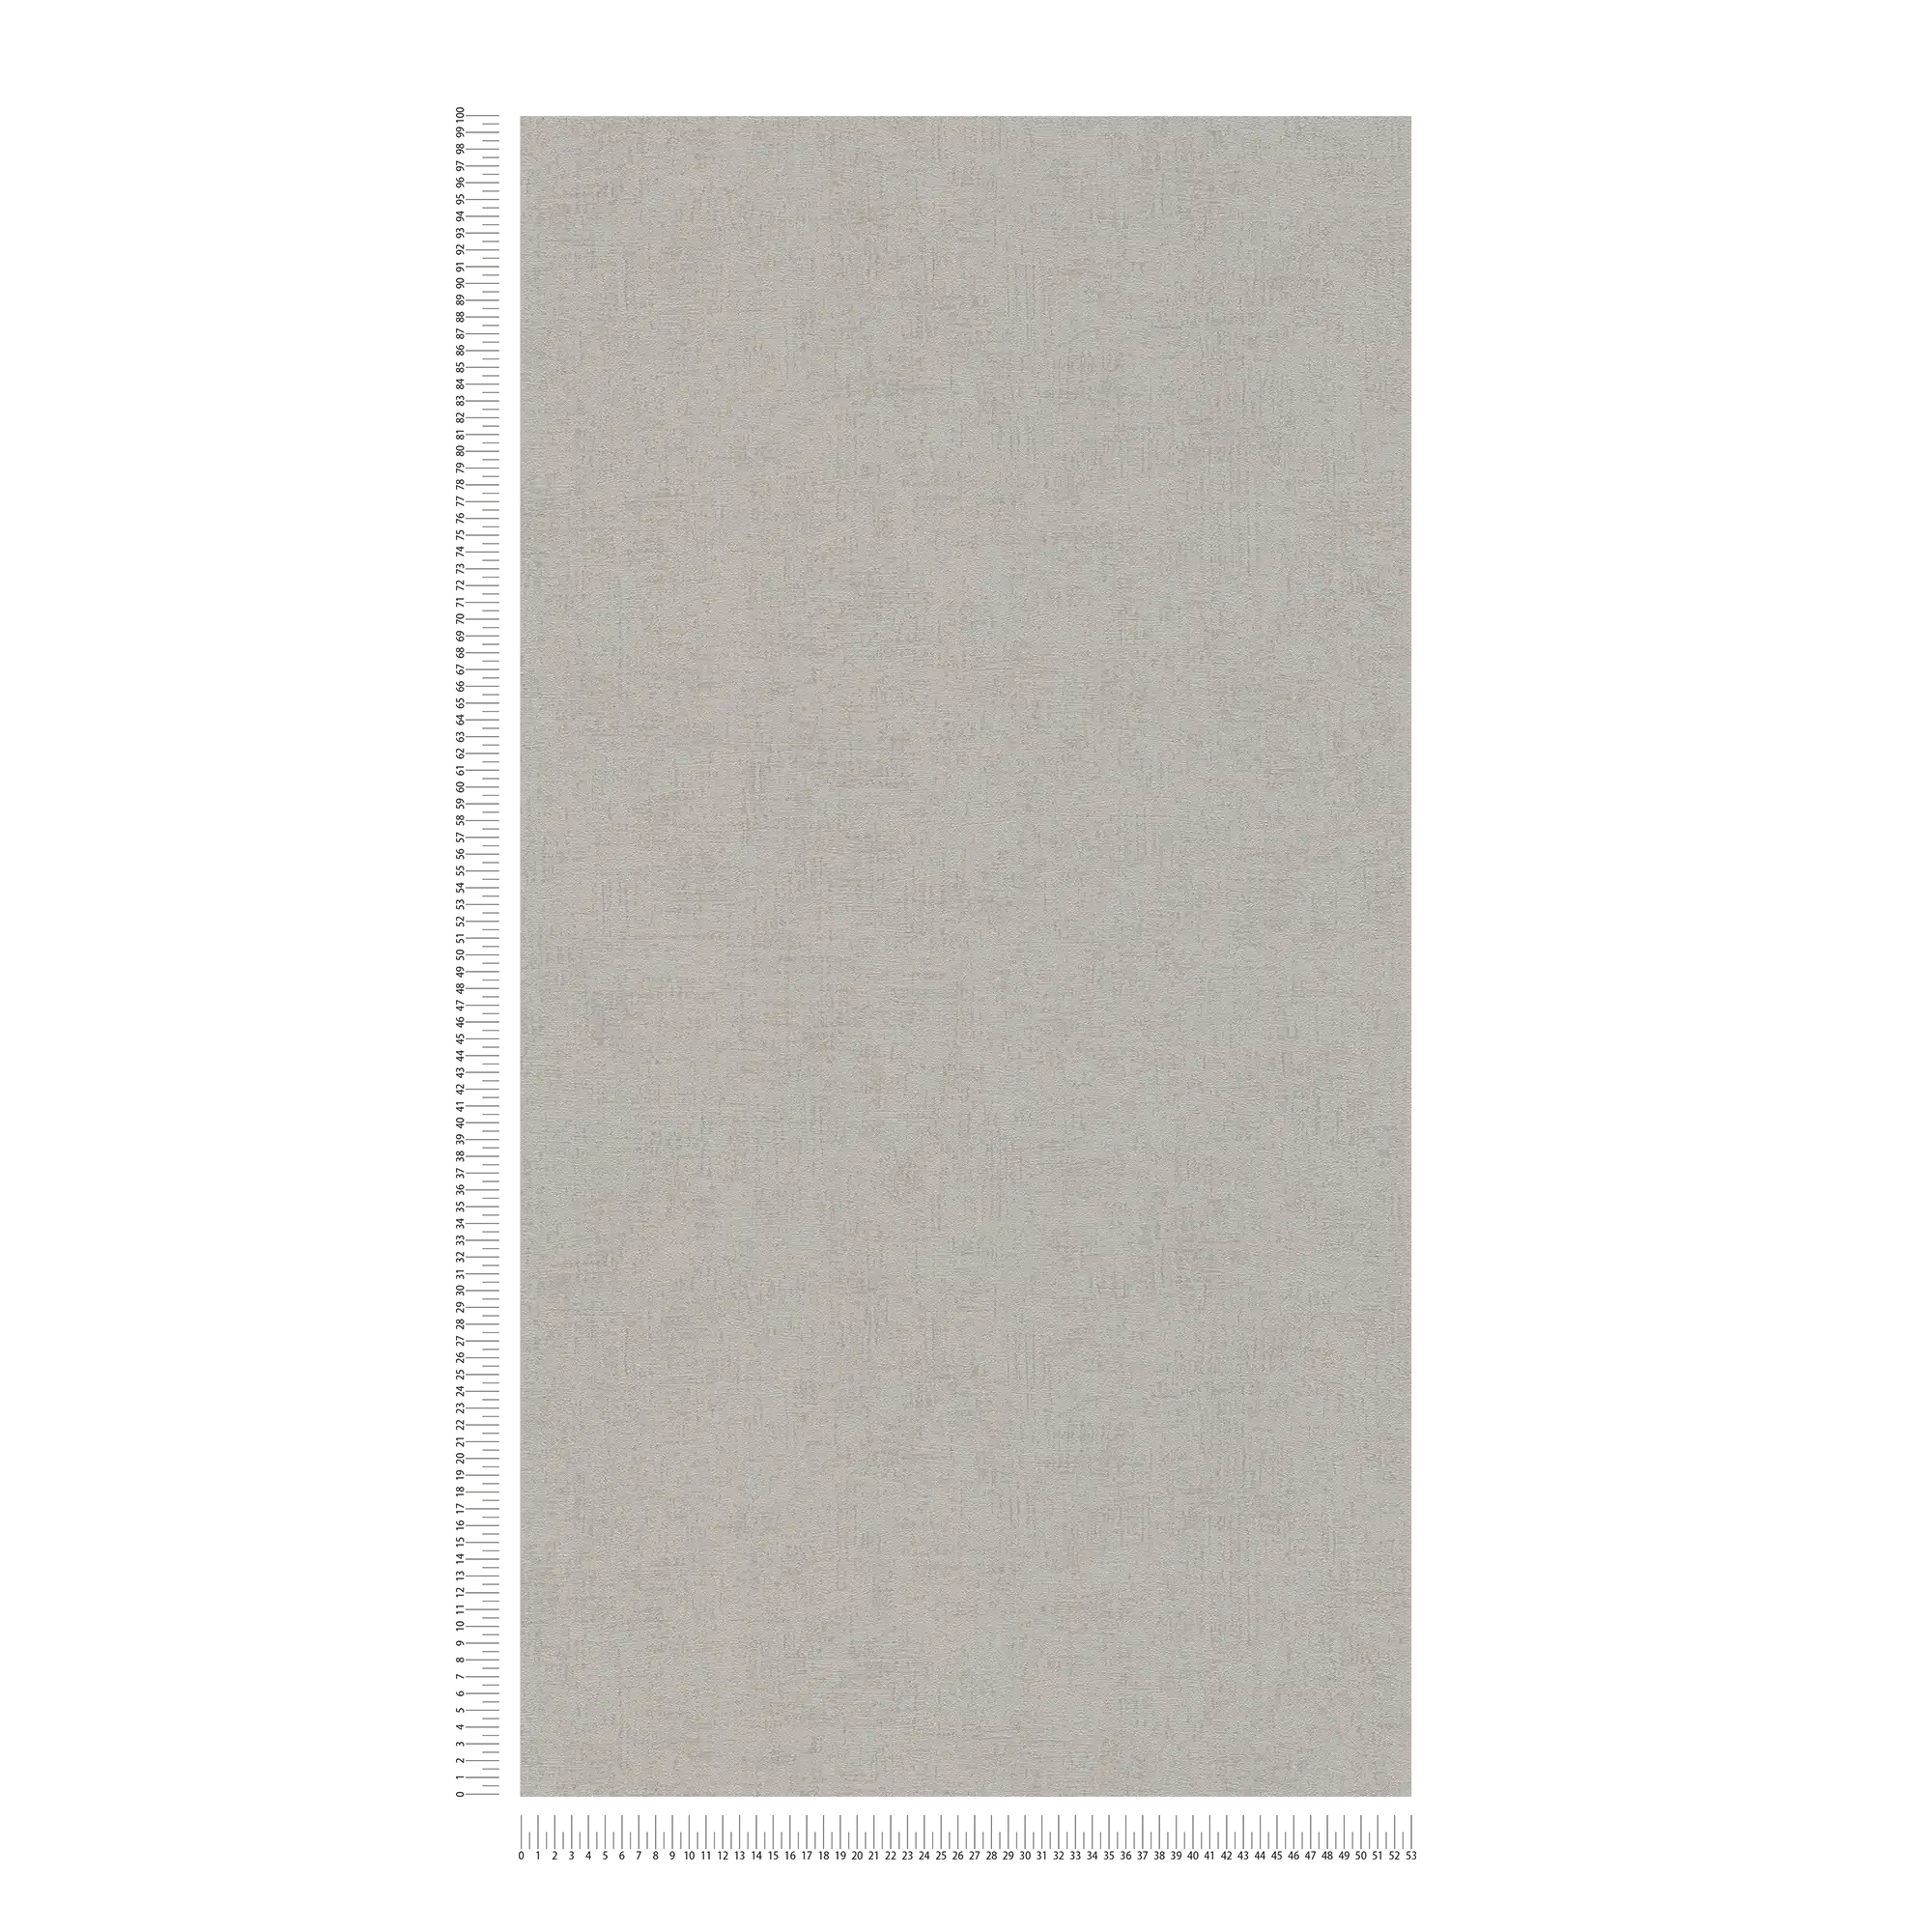             Glossy non-woven wallpaper greige with texture design - grey, metallic
        